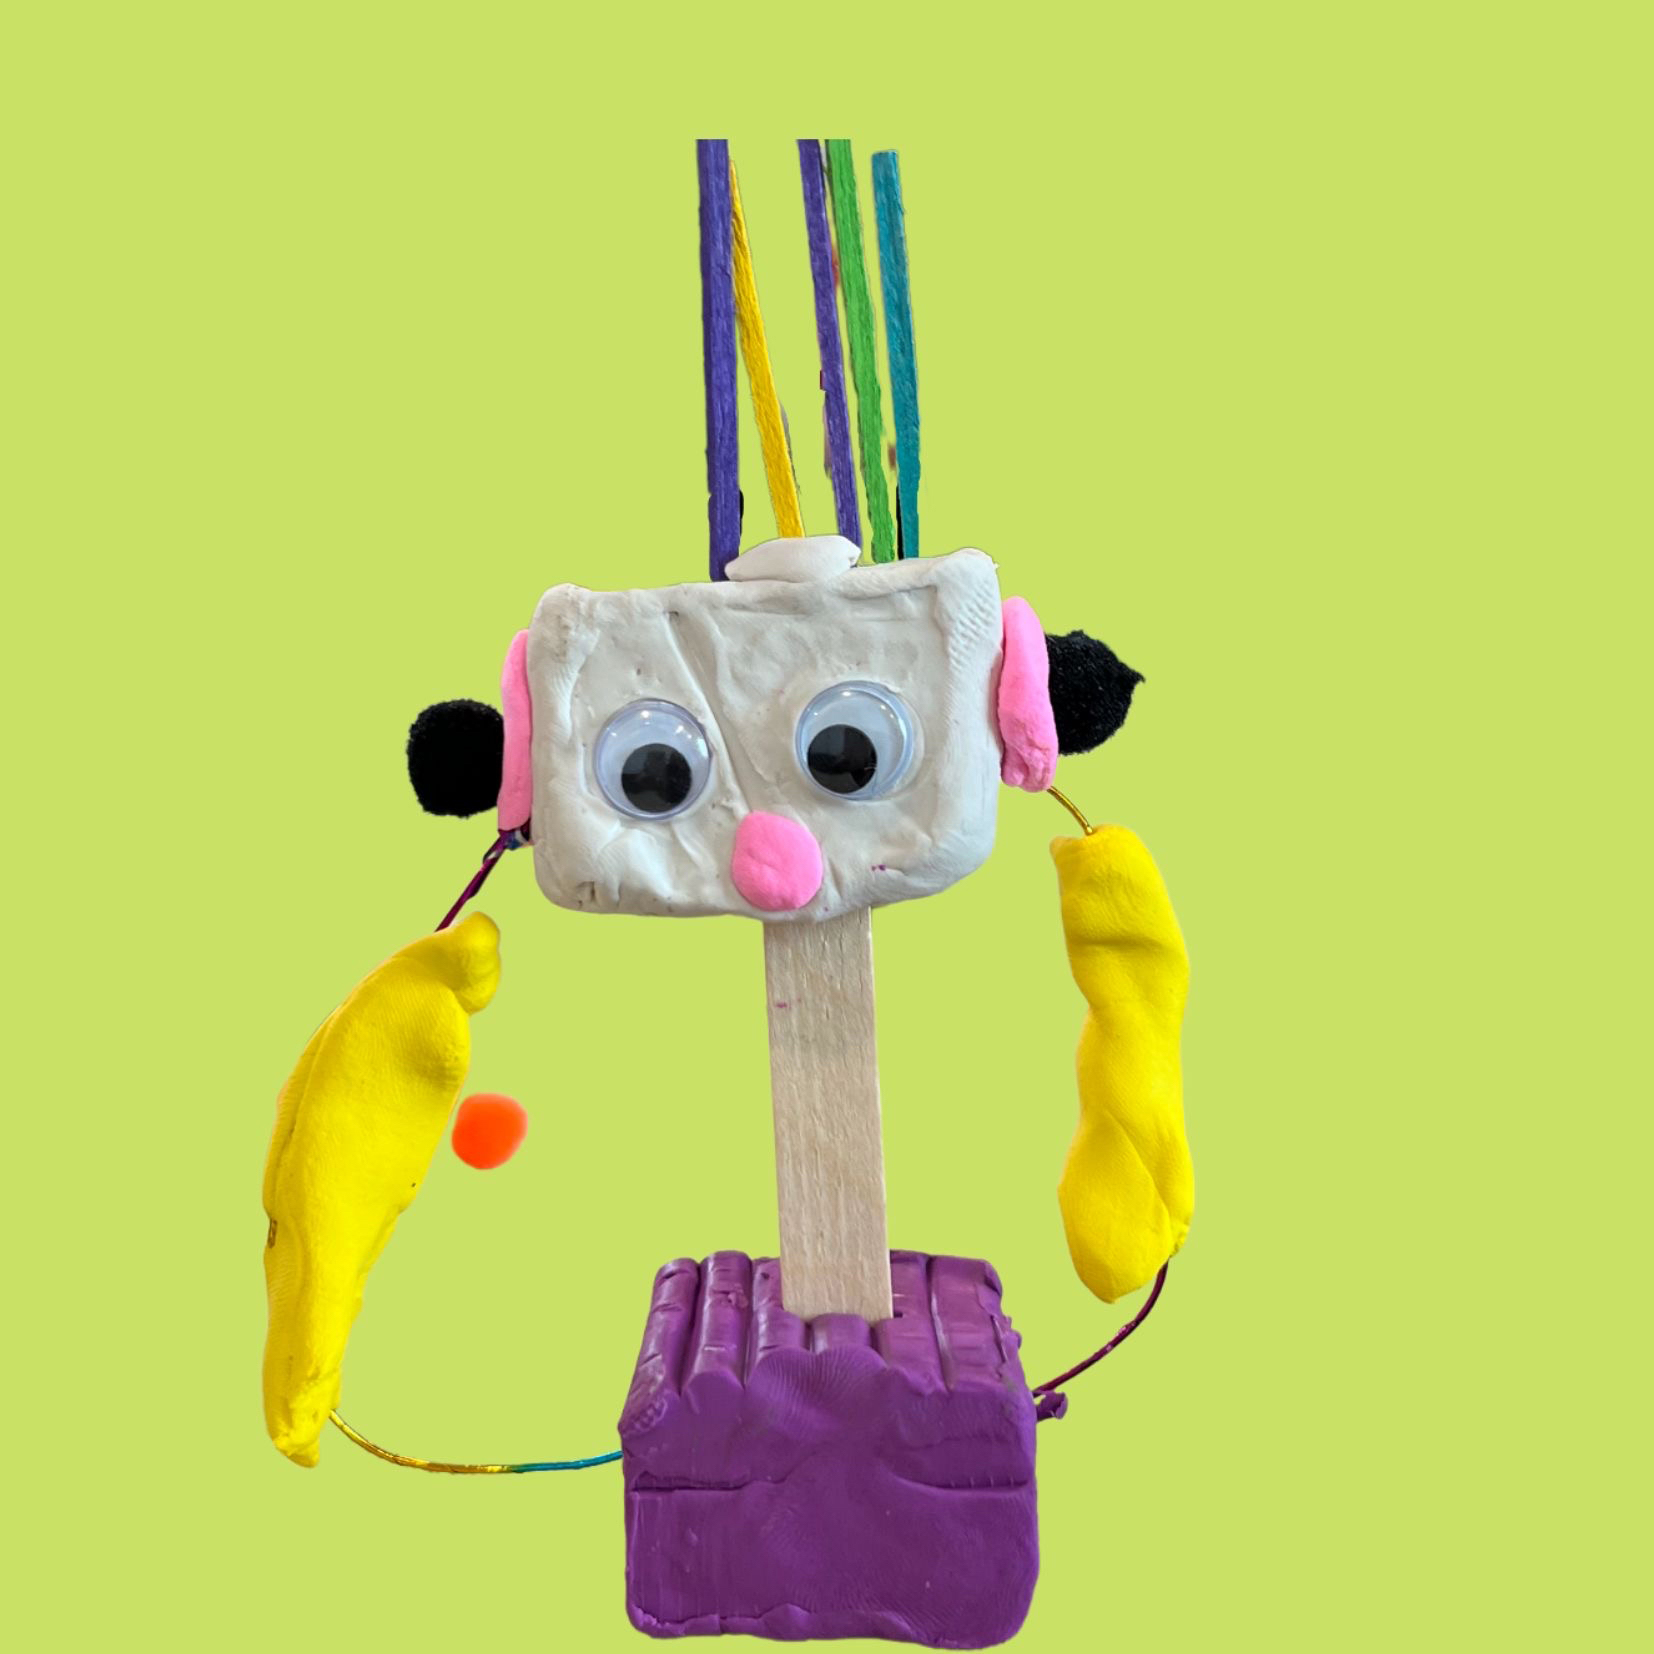 Robot made from plasticine